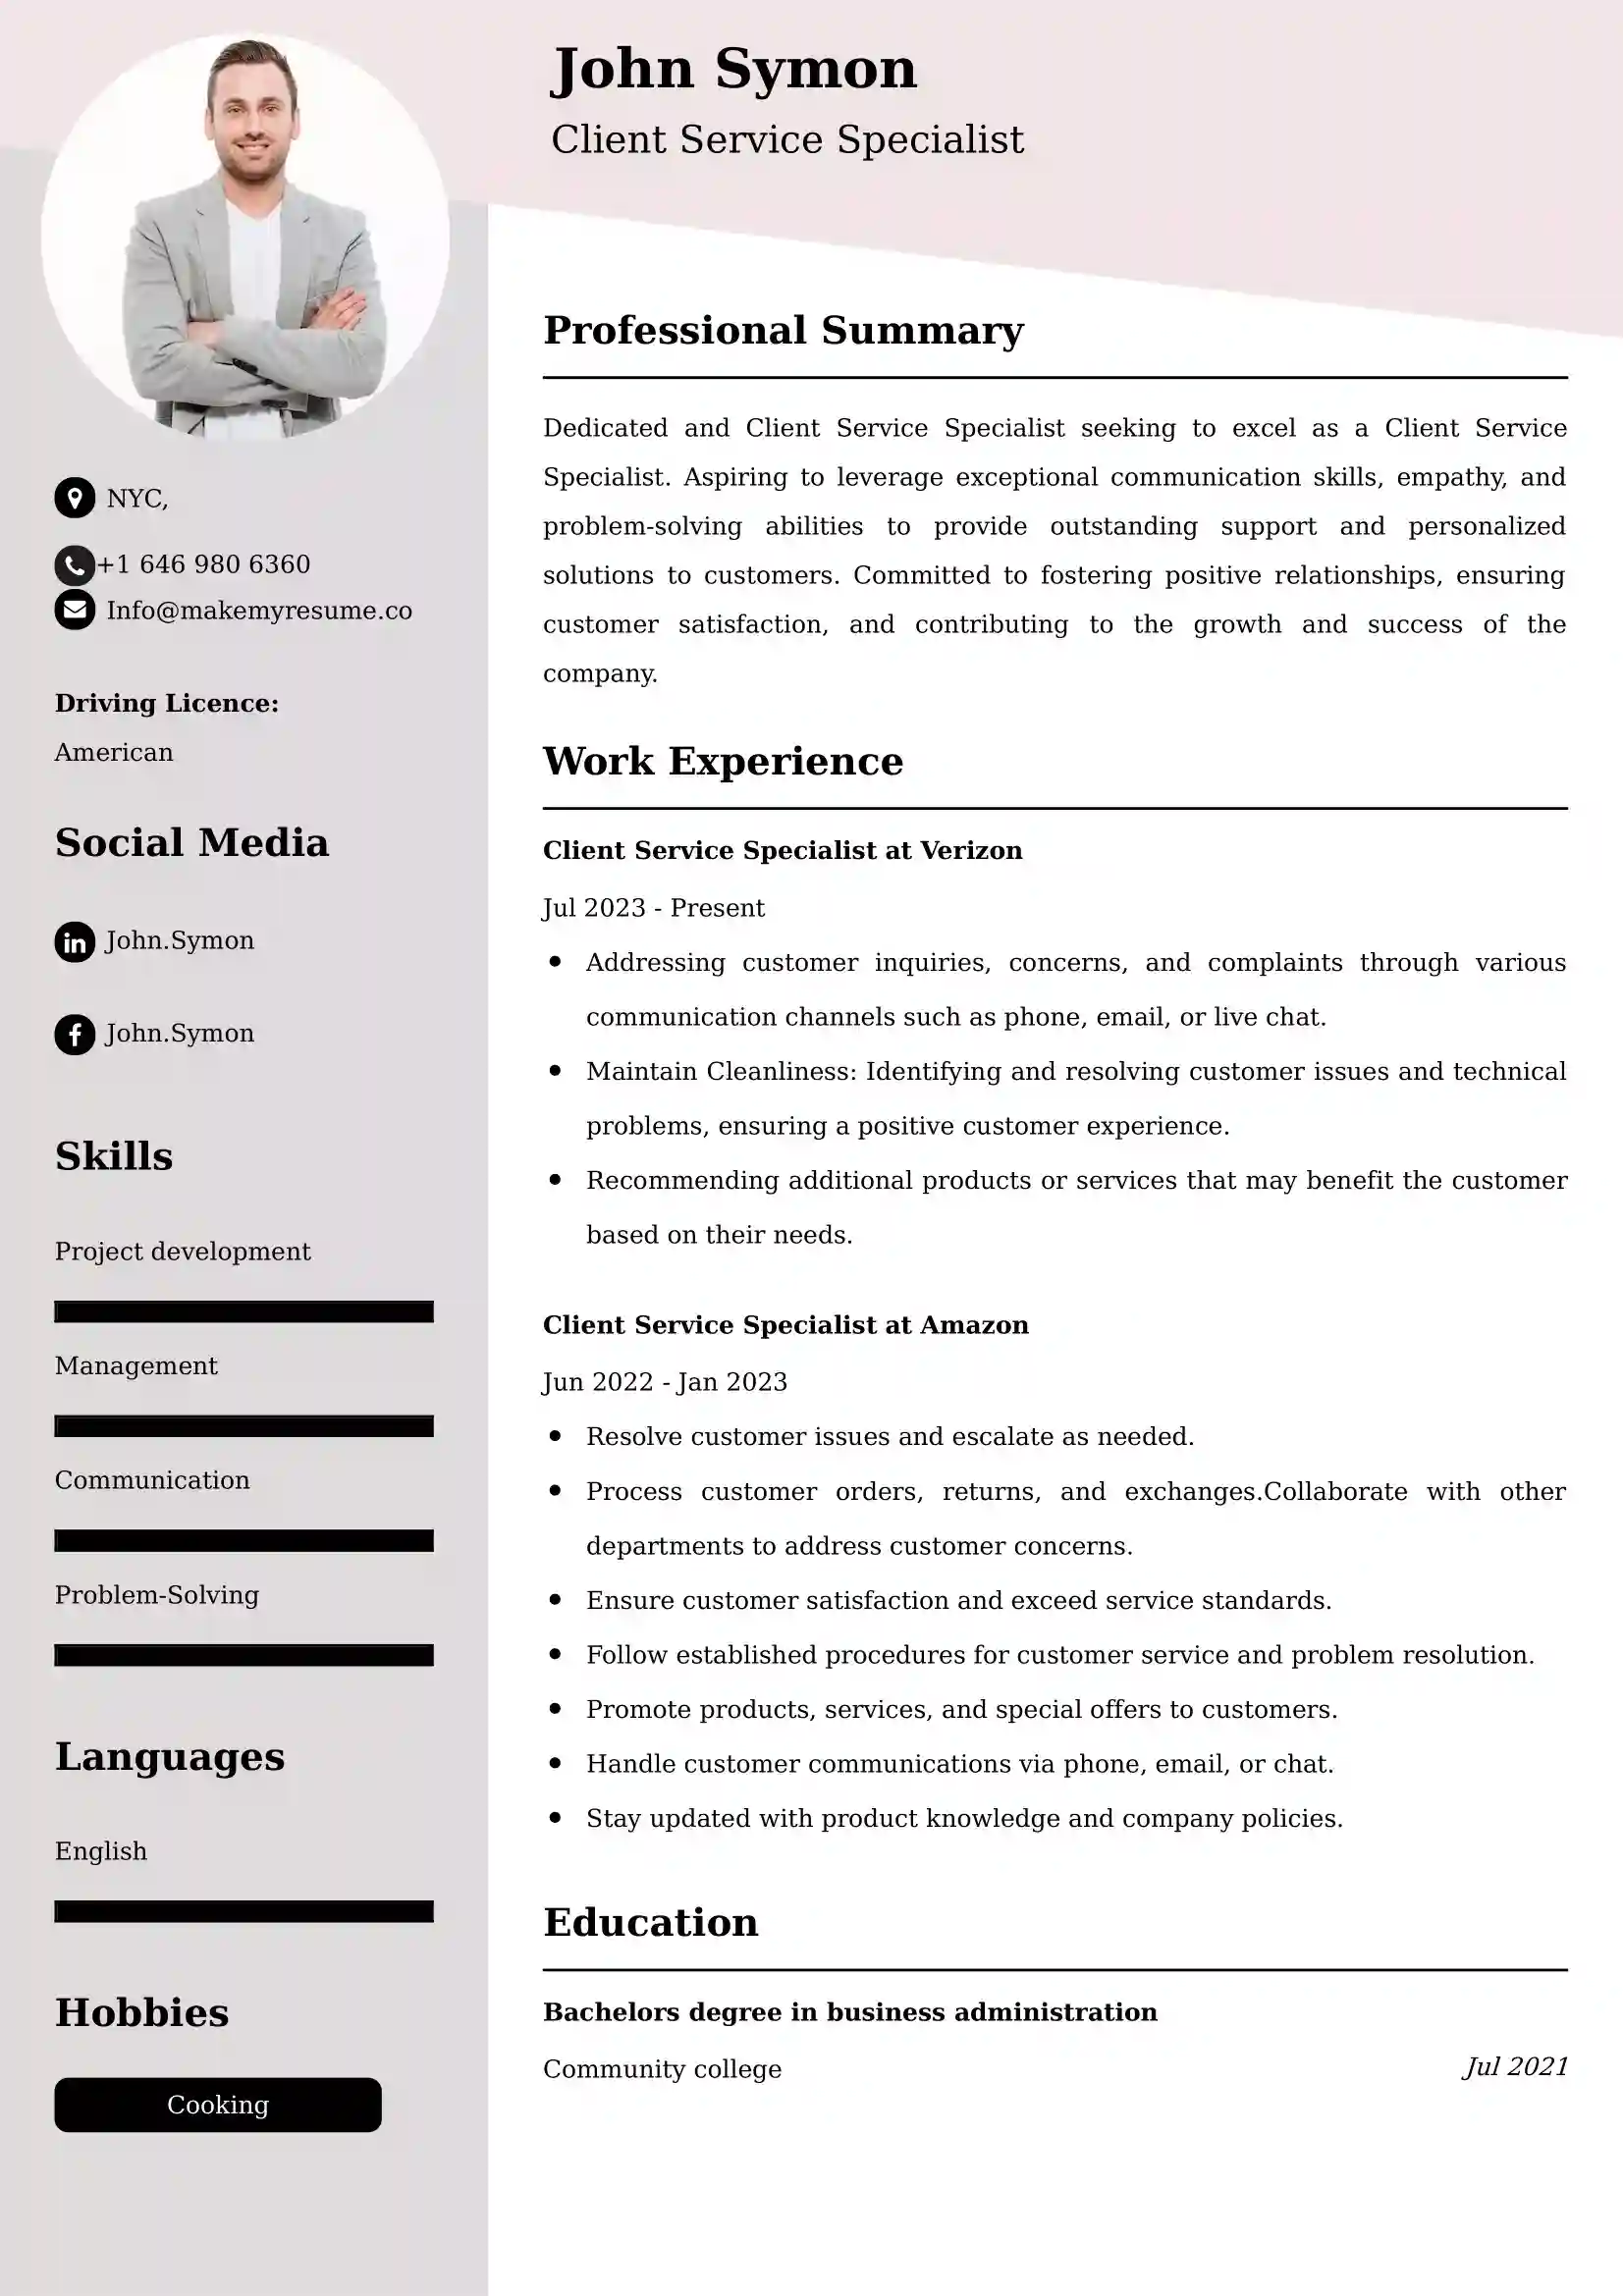 Client Service Specialist Resume Examples - Brazilian Format, Latest Template